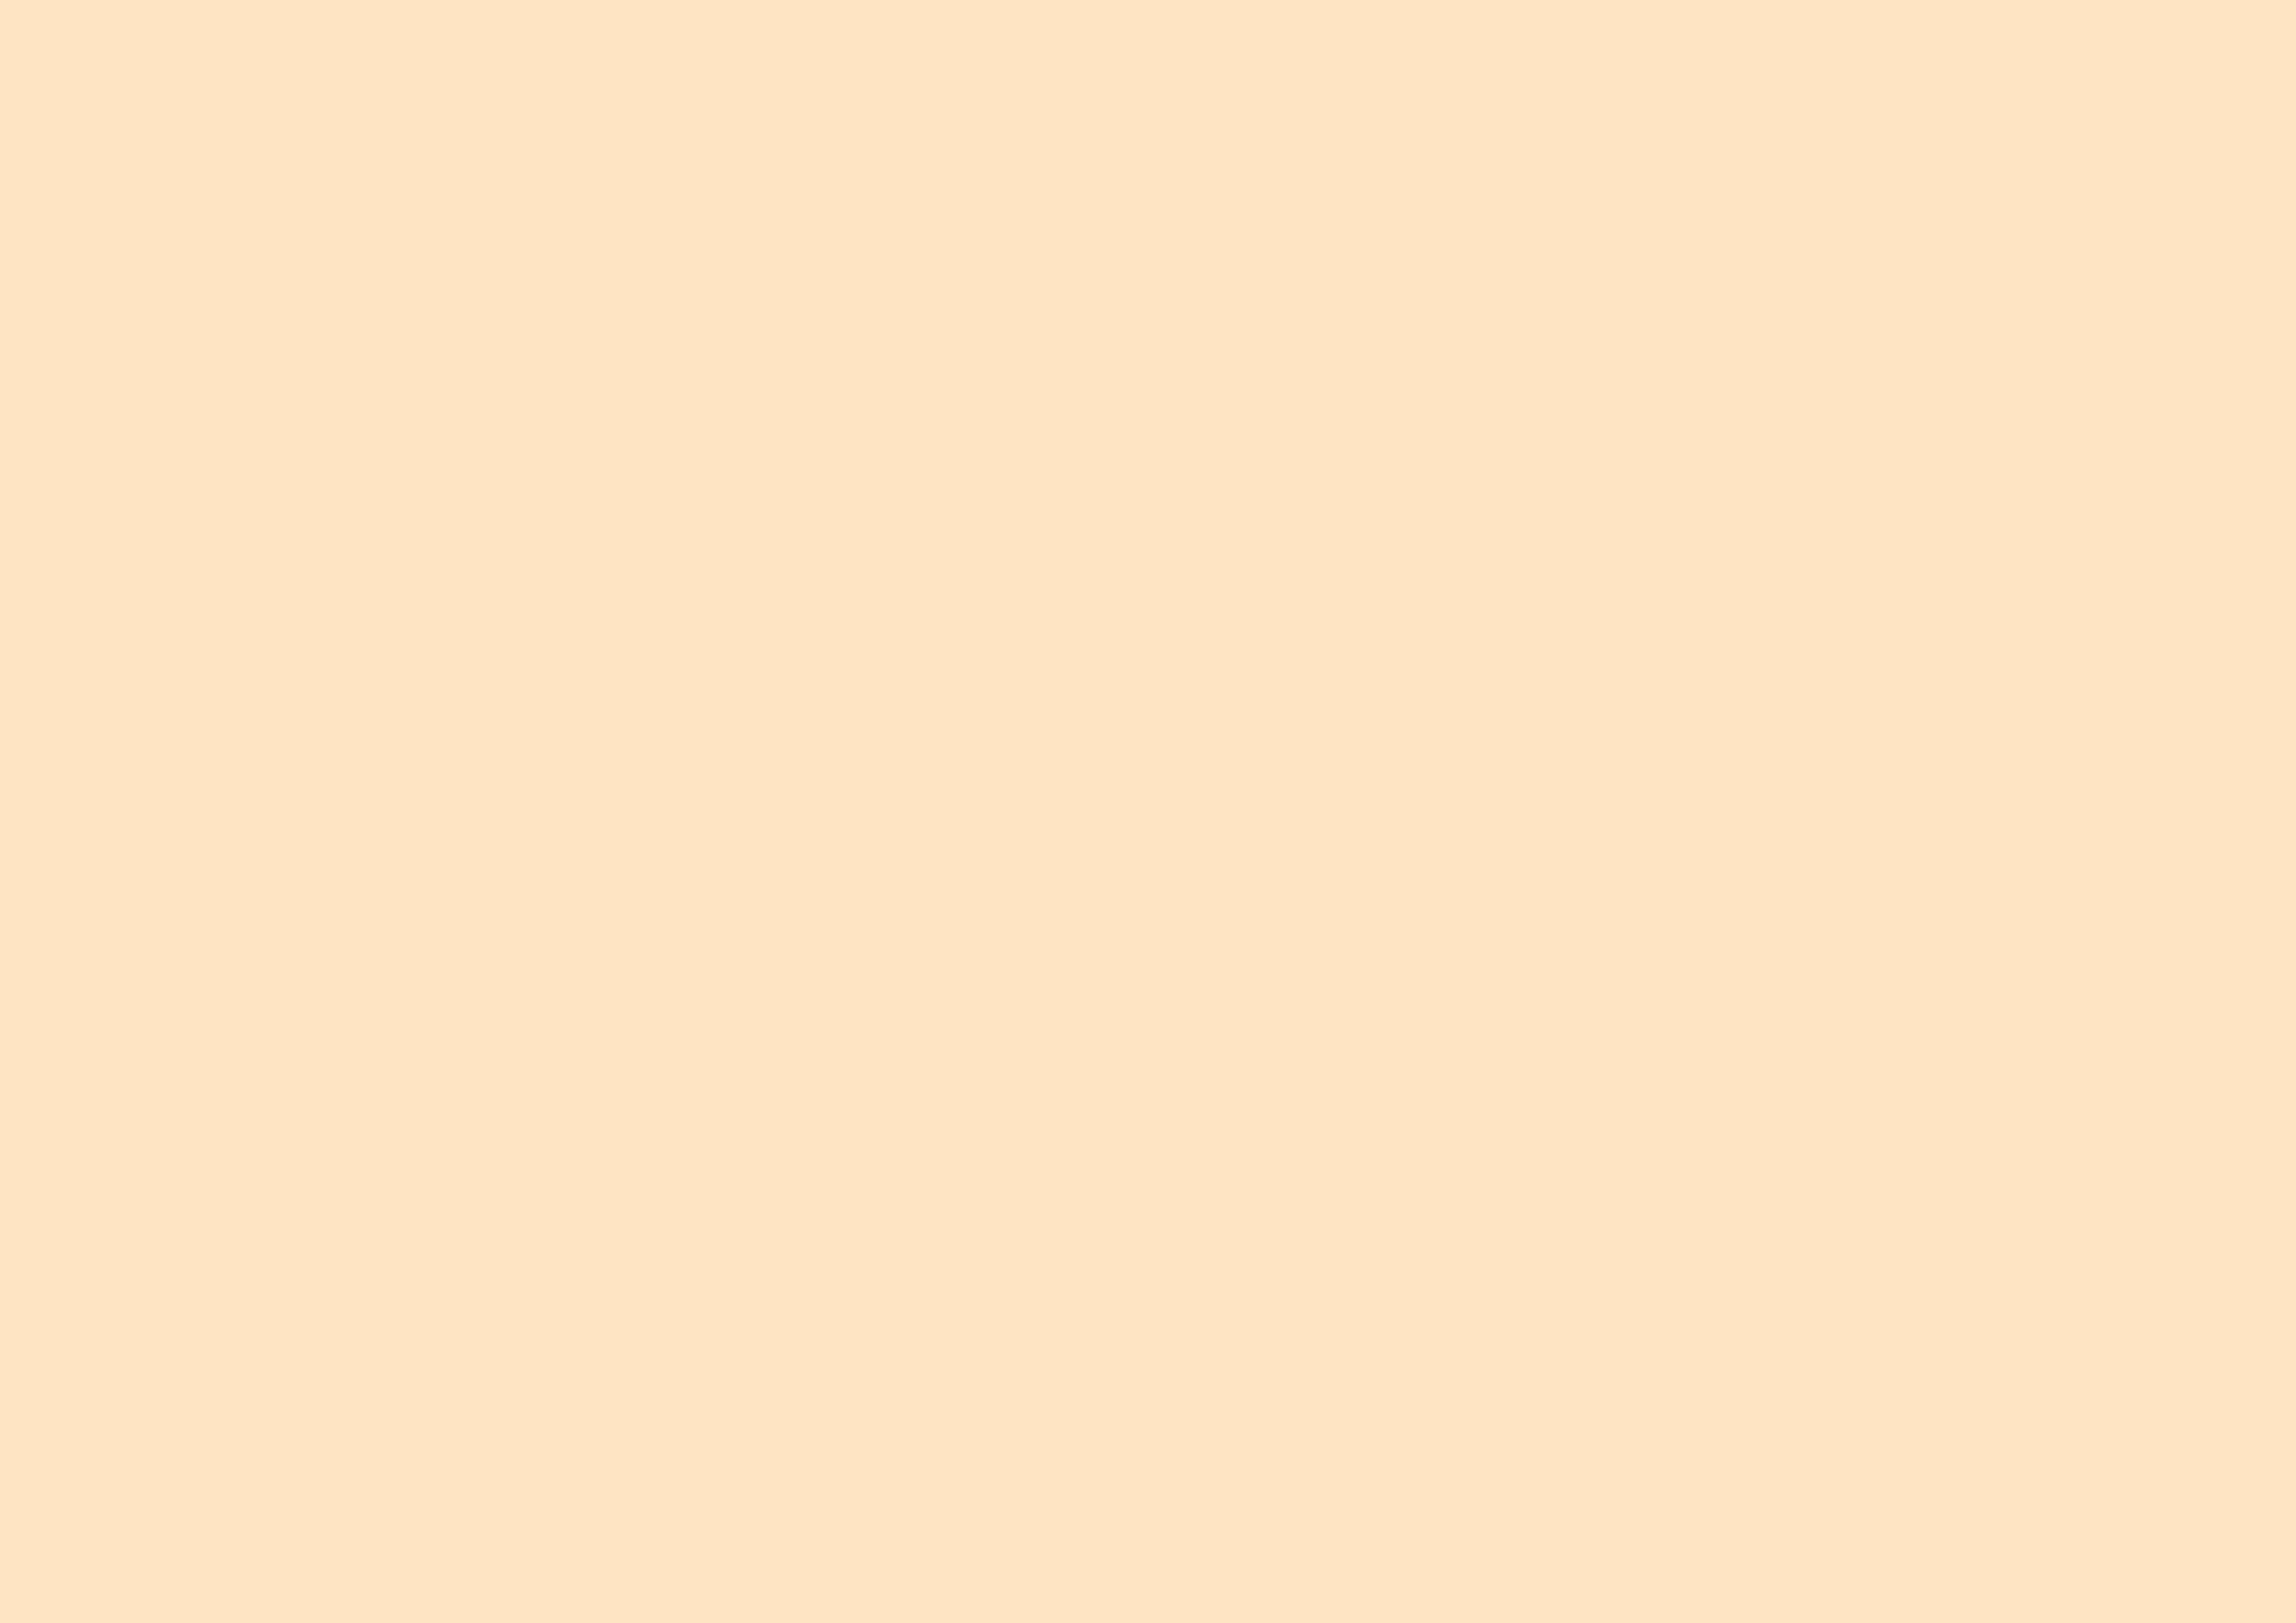 3508x2480 Bisque Solid Color Background